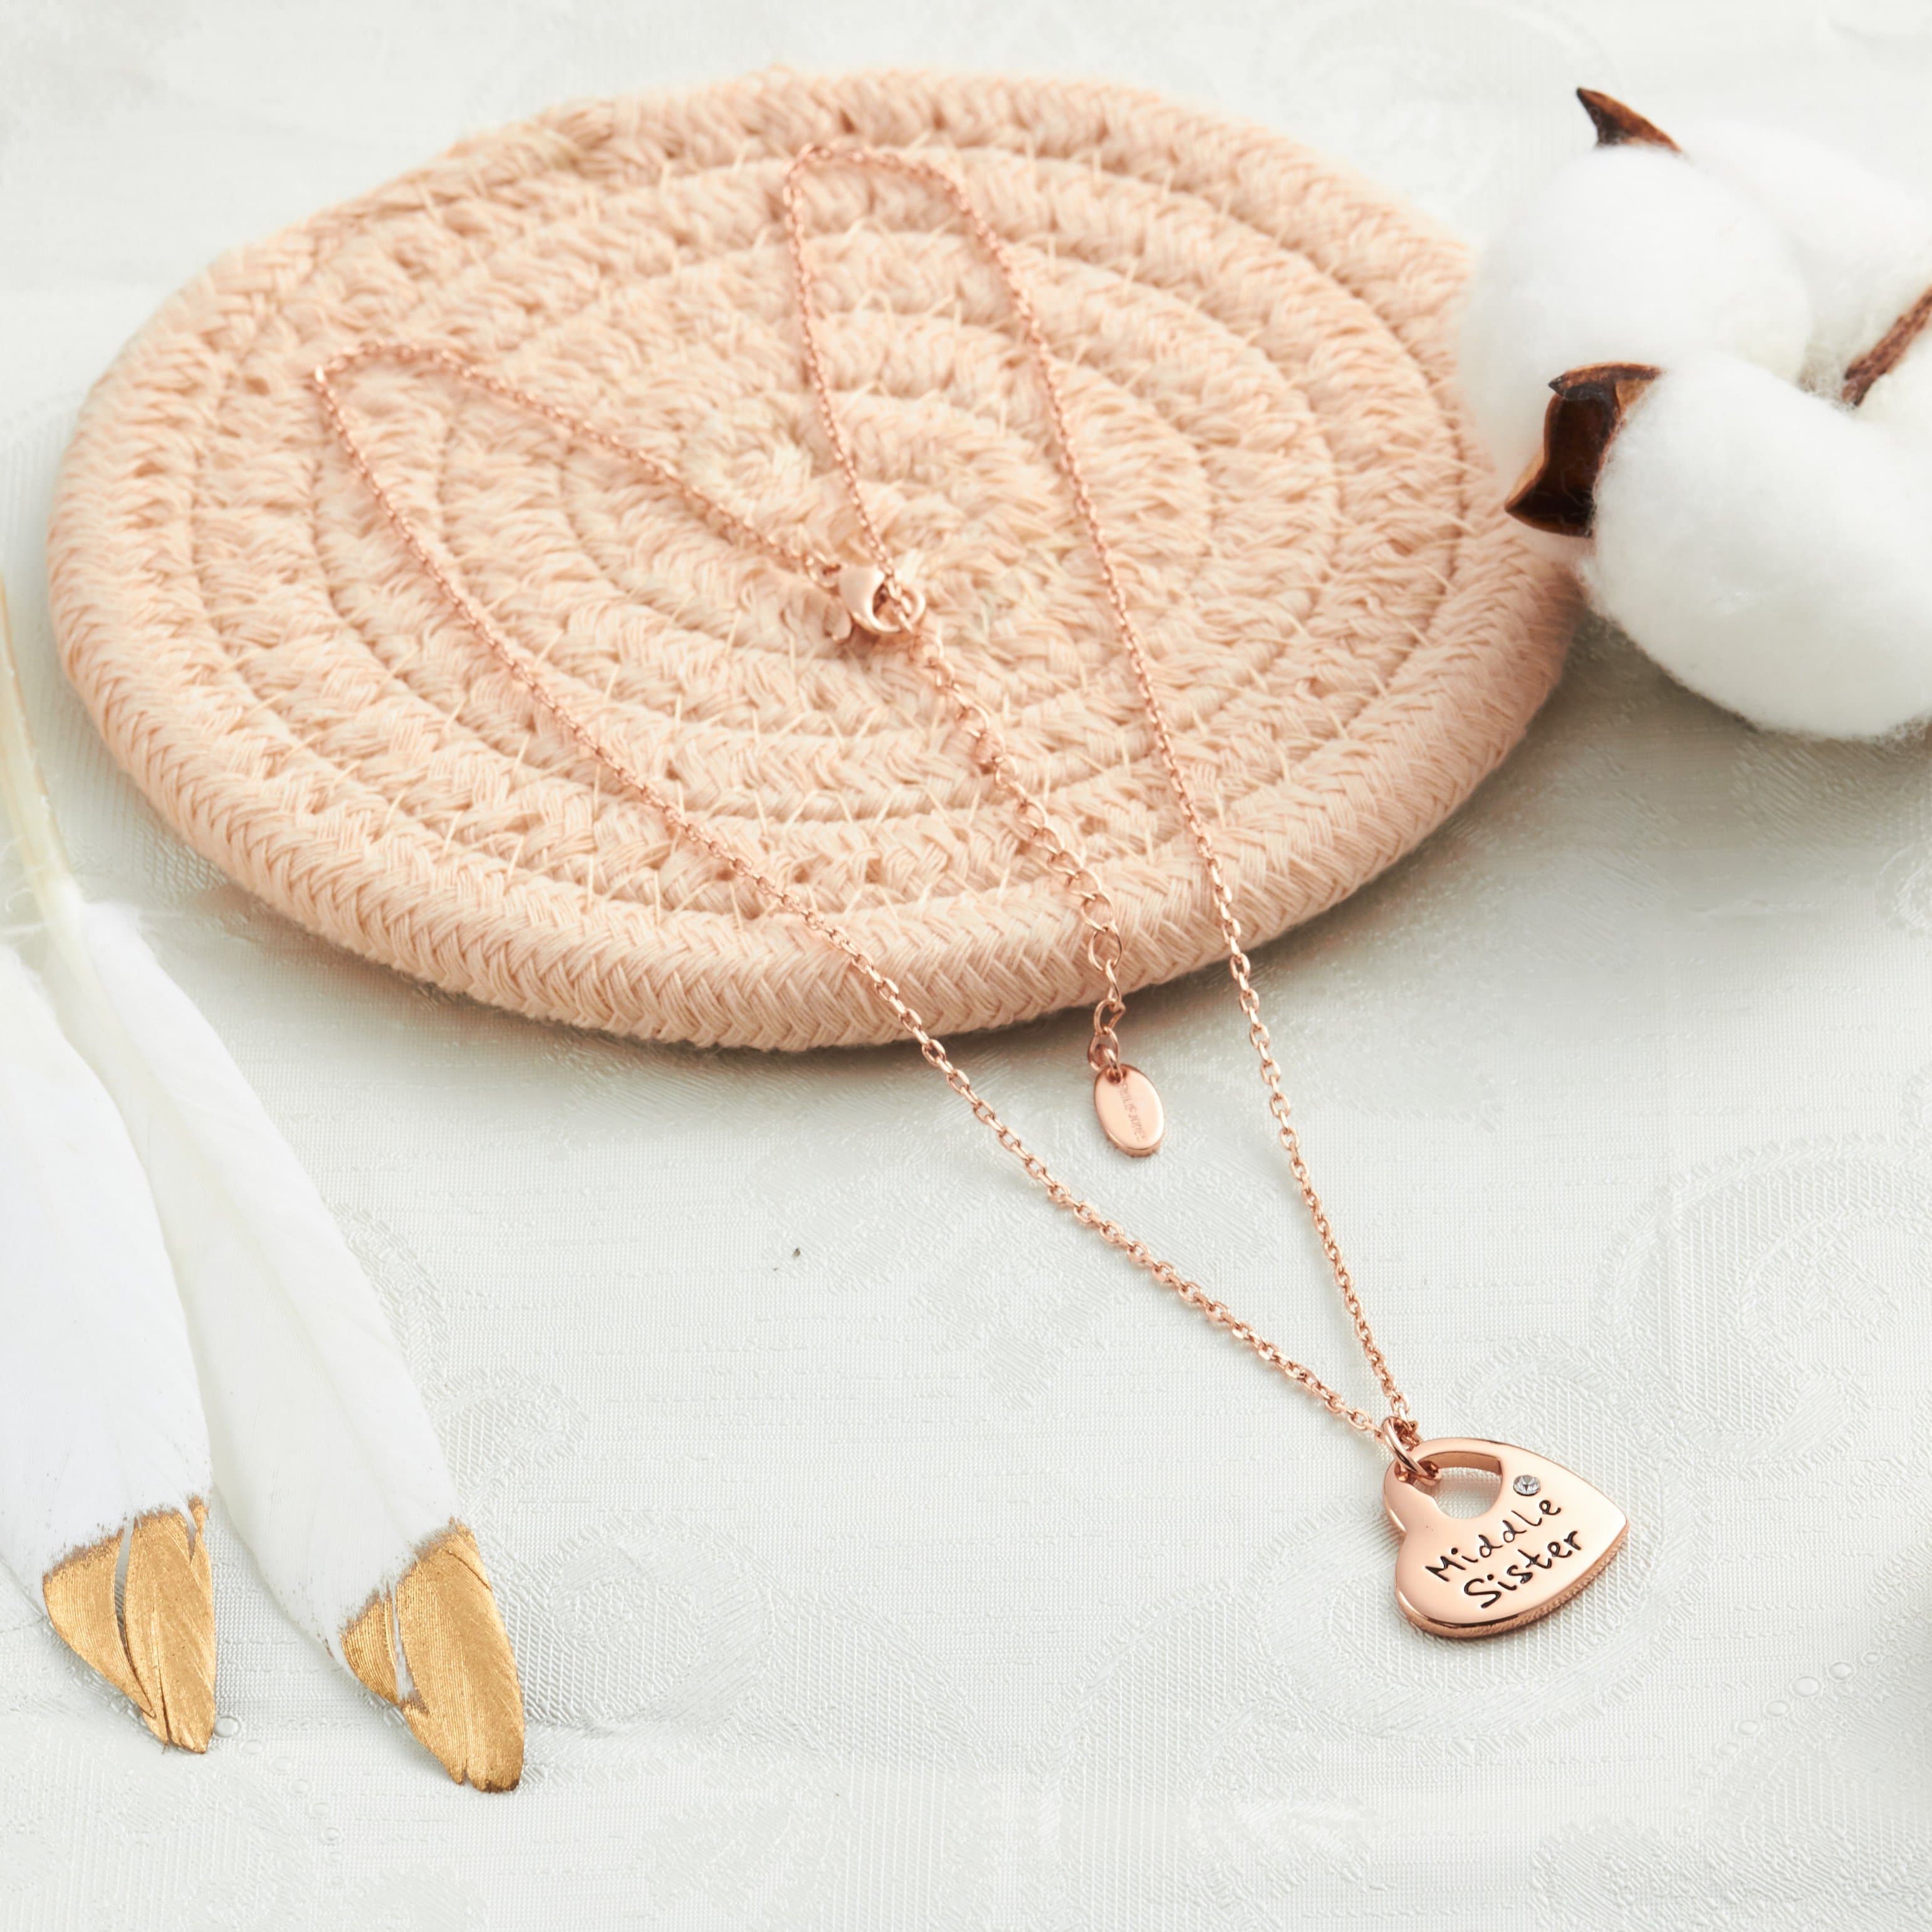 Rose Gold Plated Middle Sister Heart Necklace Created with Zircondia® Crystals